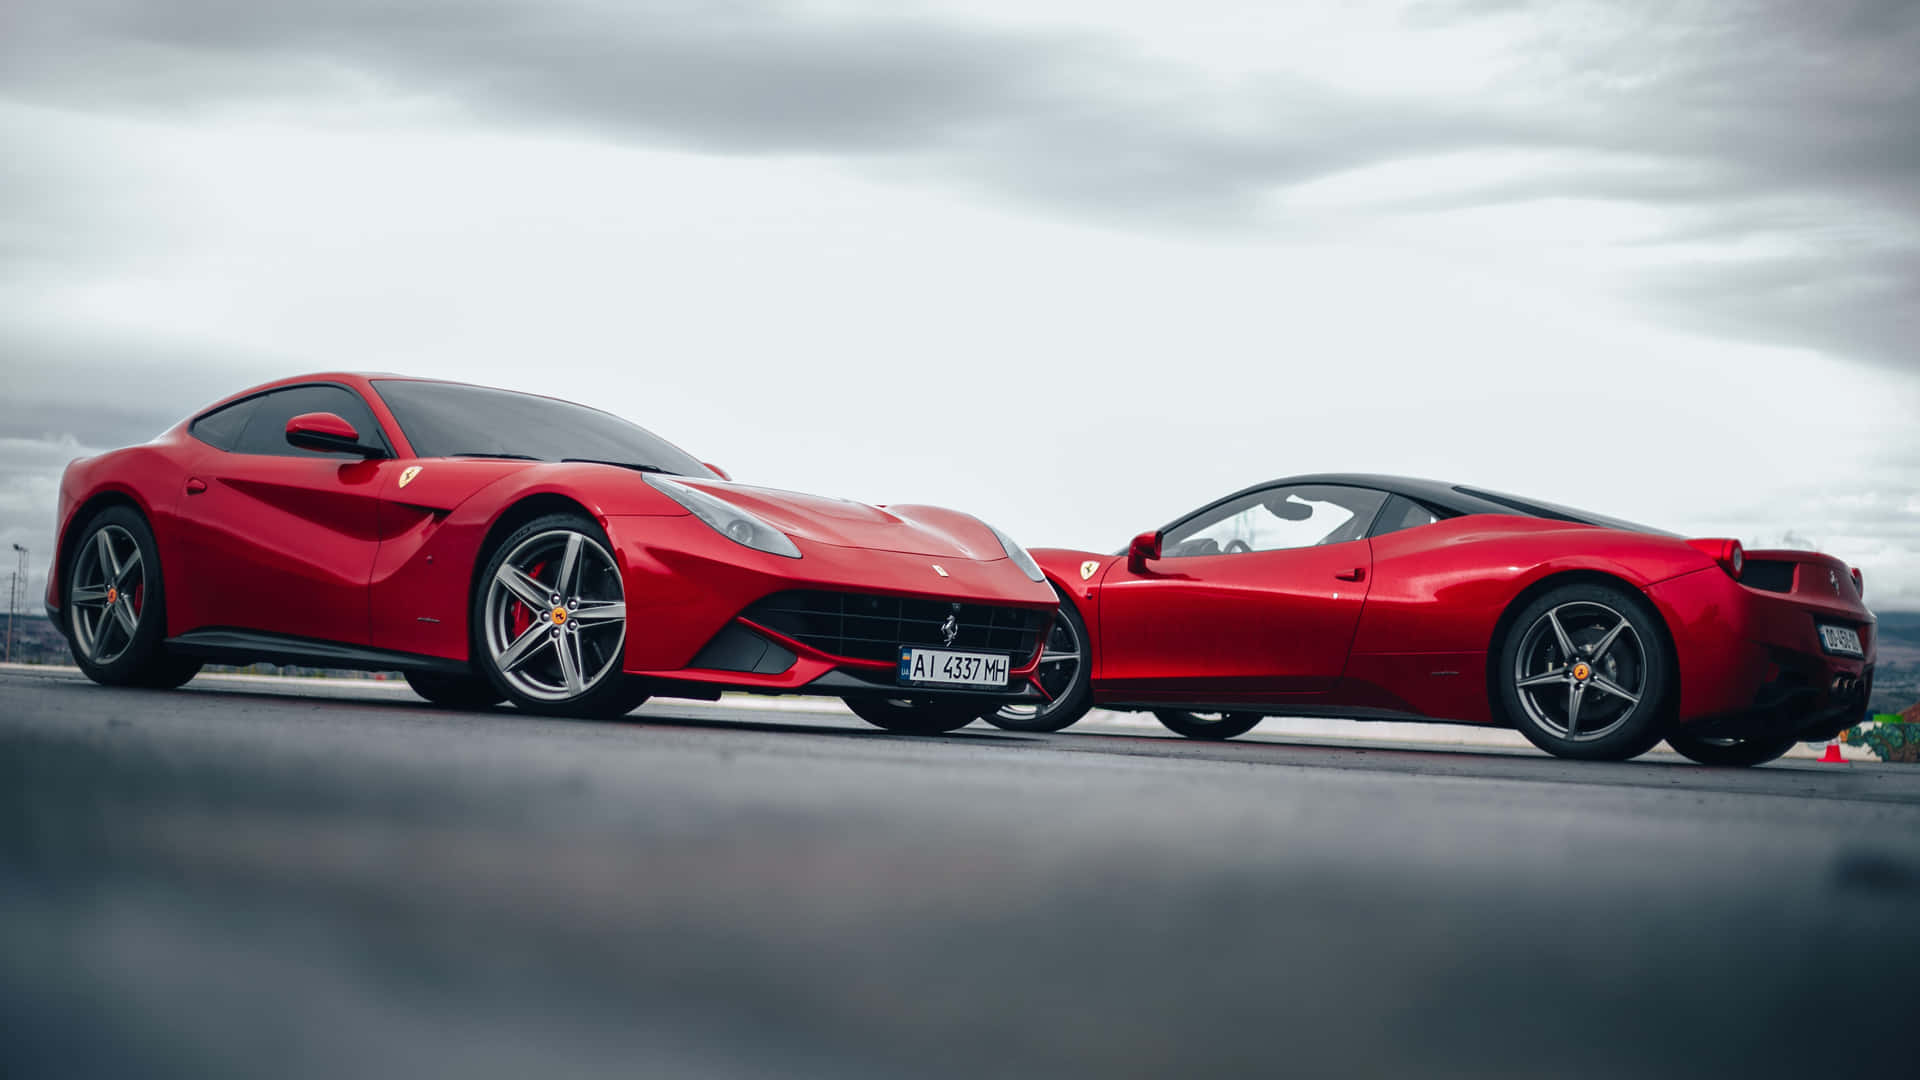 Rev up your engines and get ready to hit the track with a stylish Ferrari